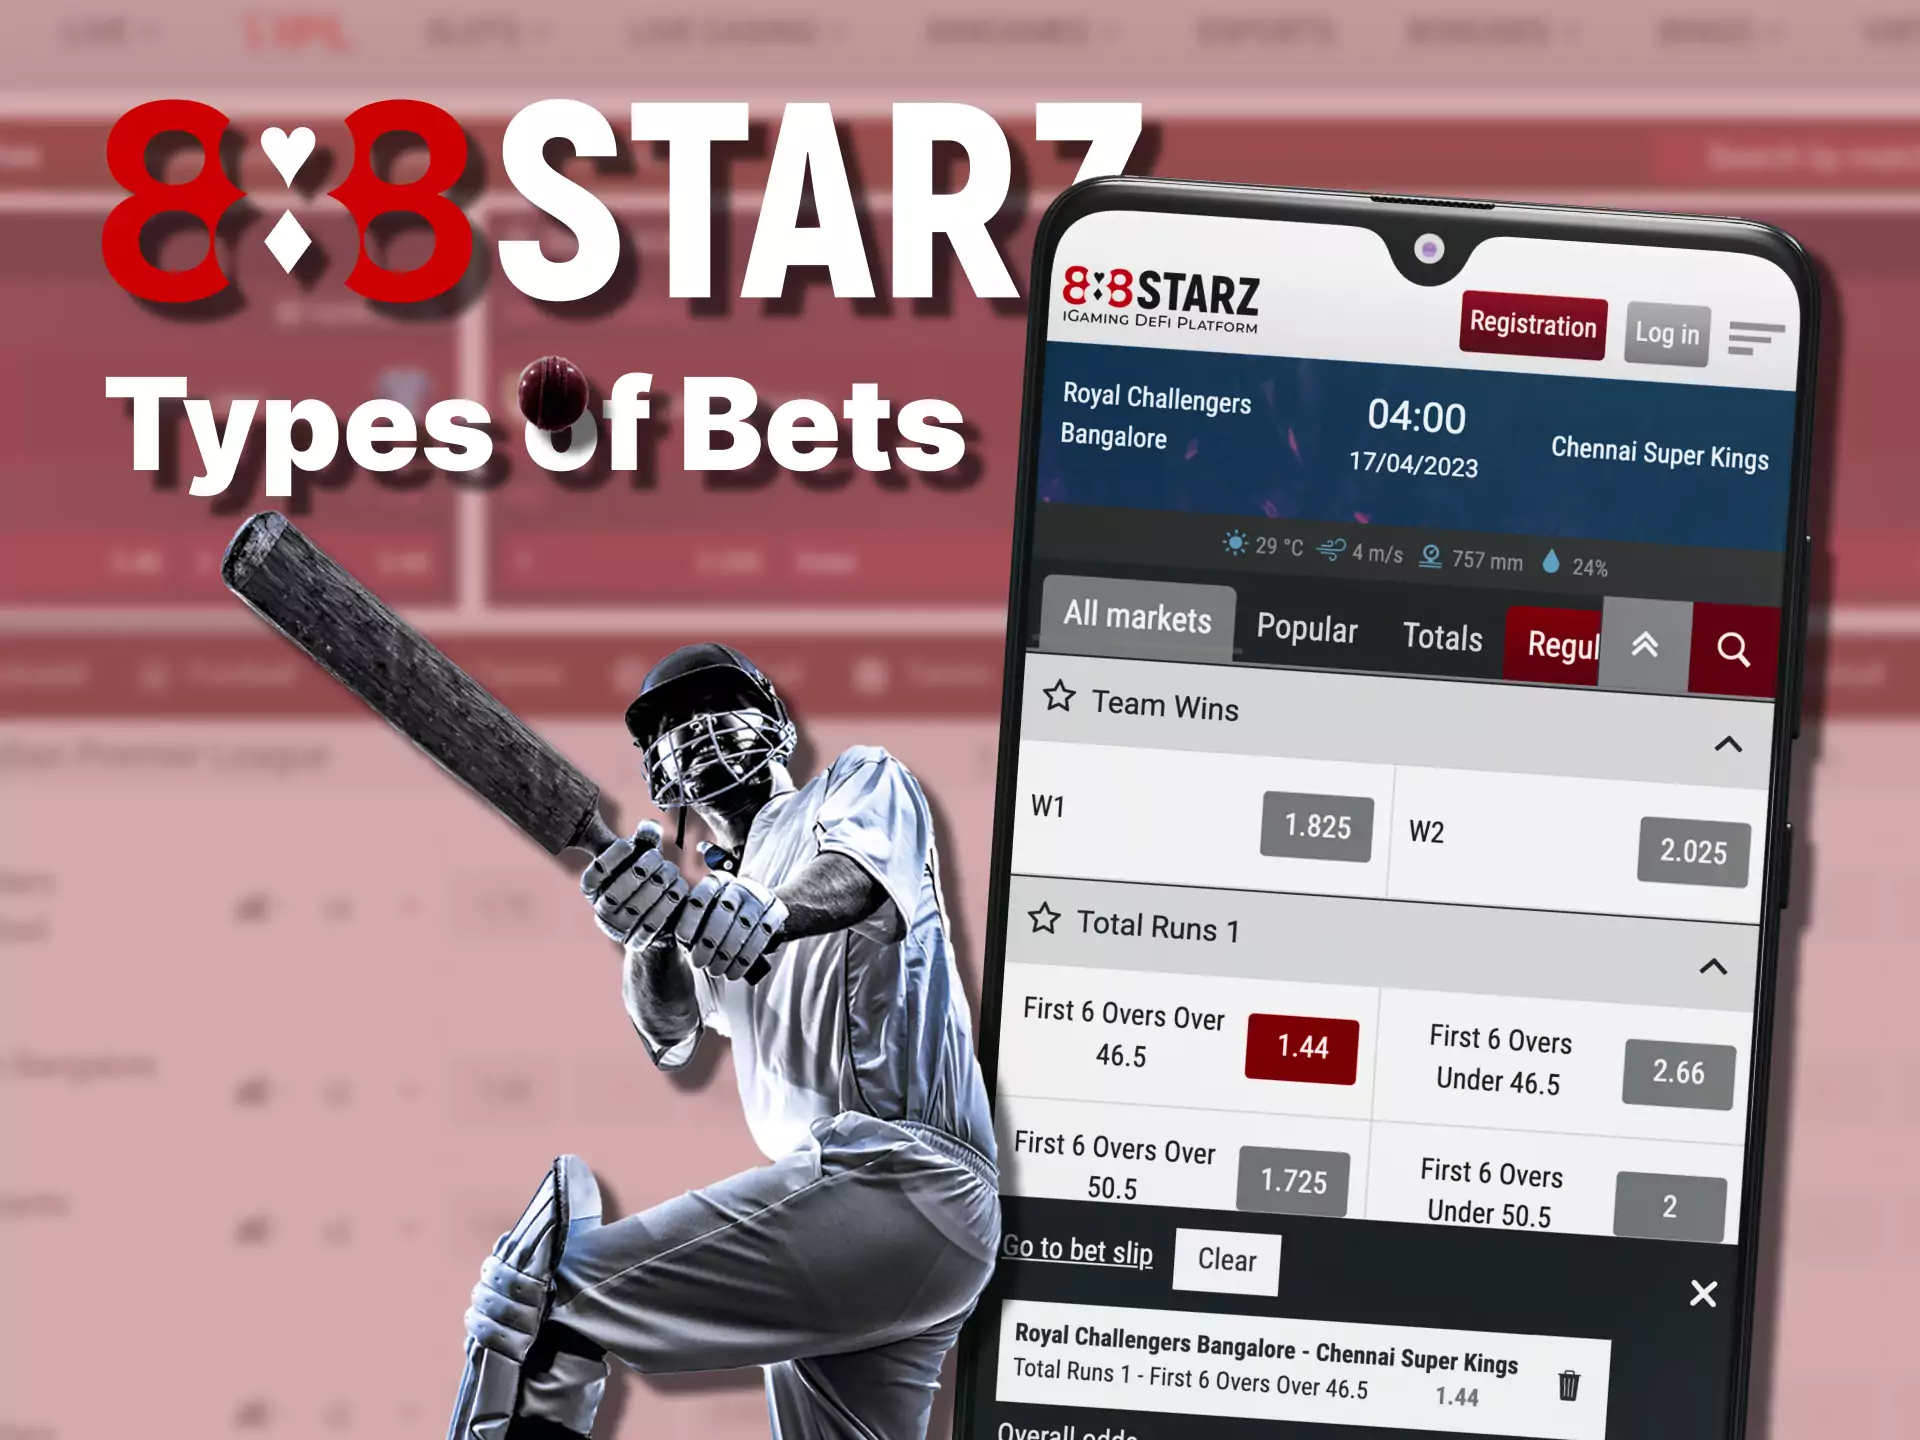 At 888starz app, try different types of bets.